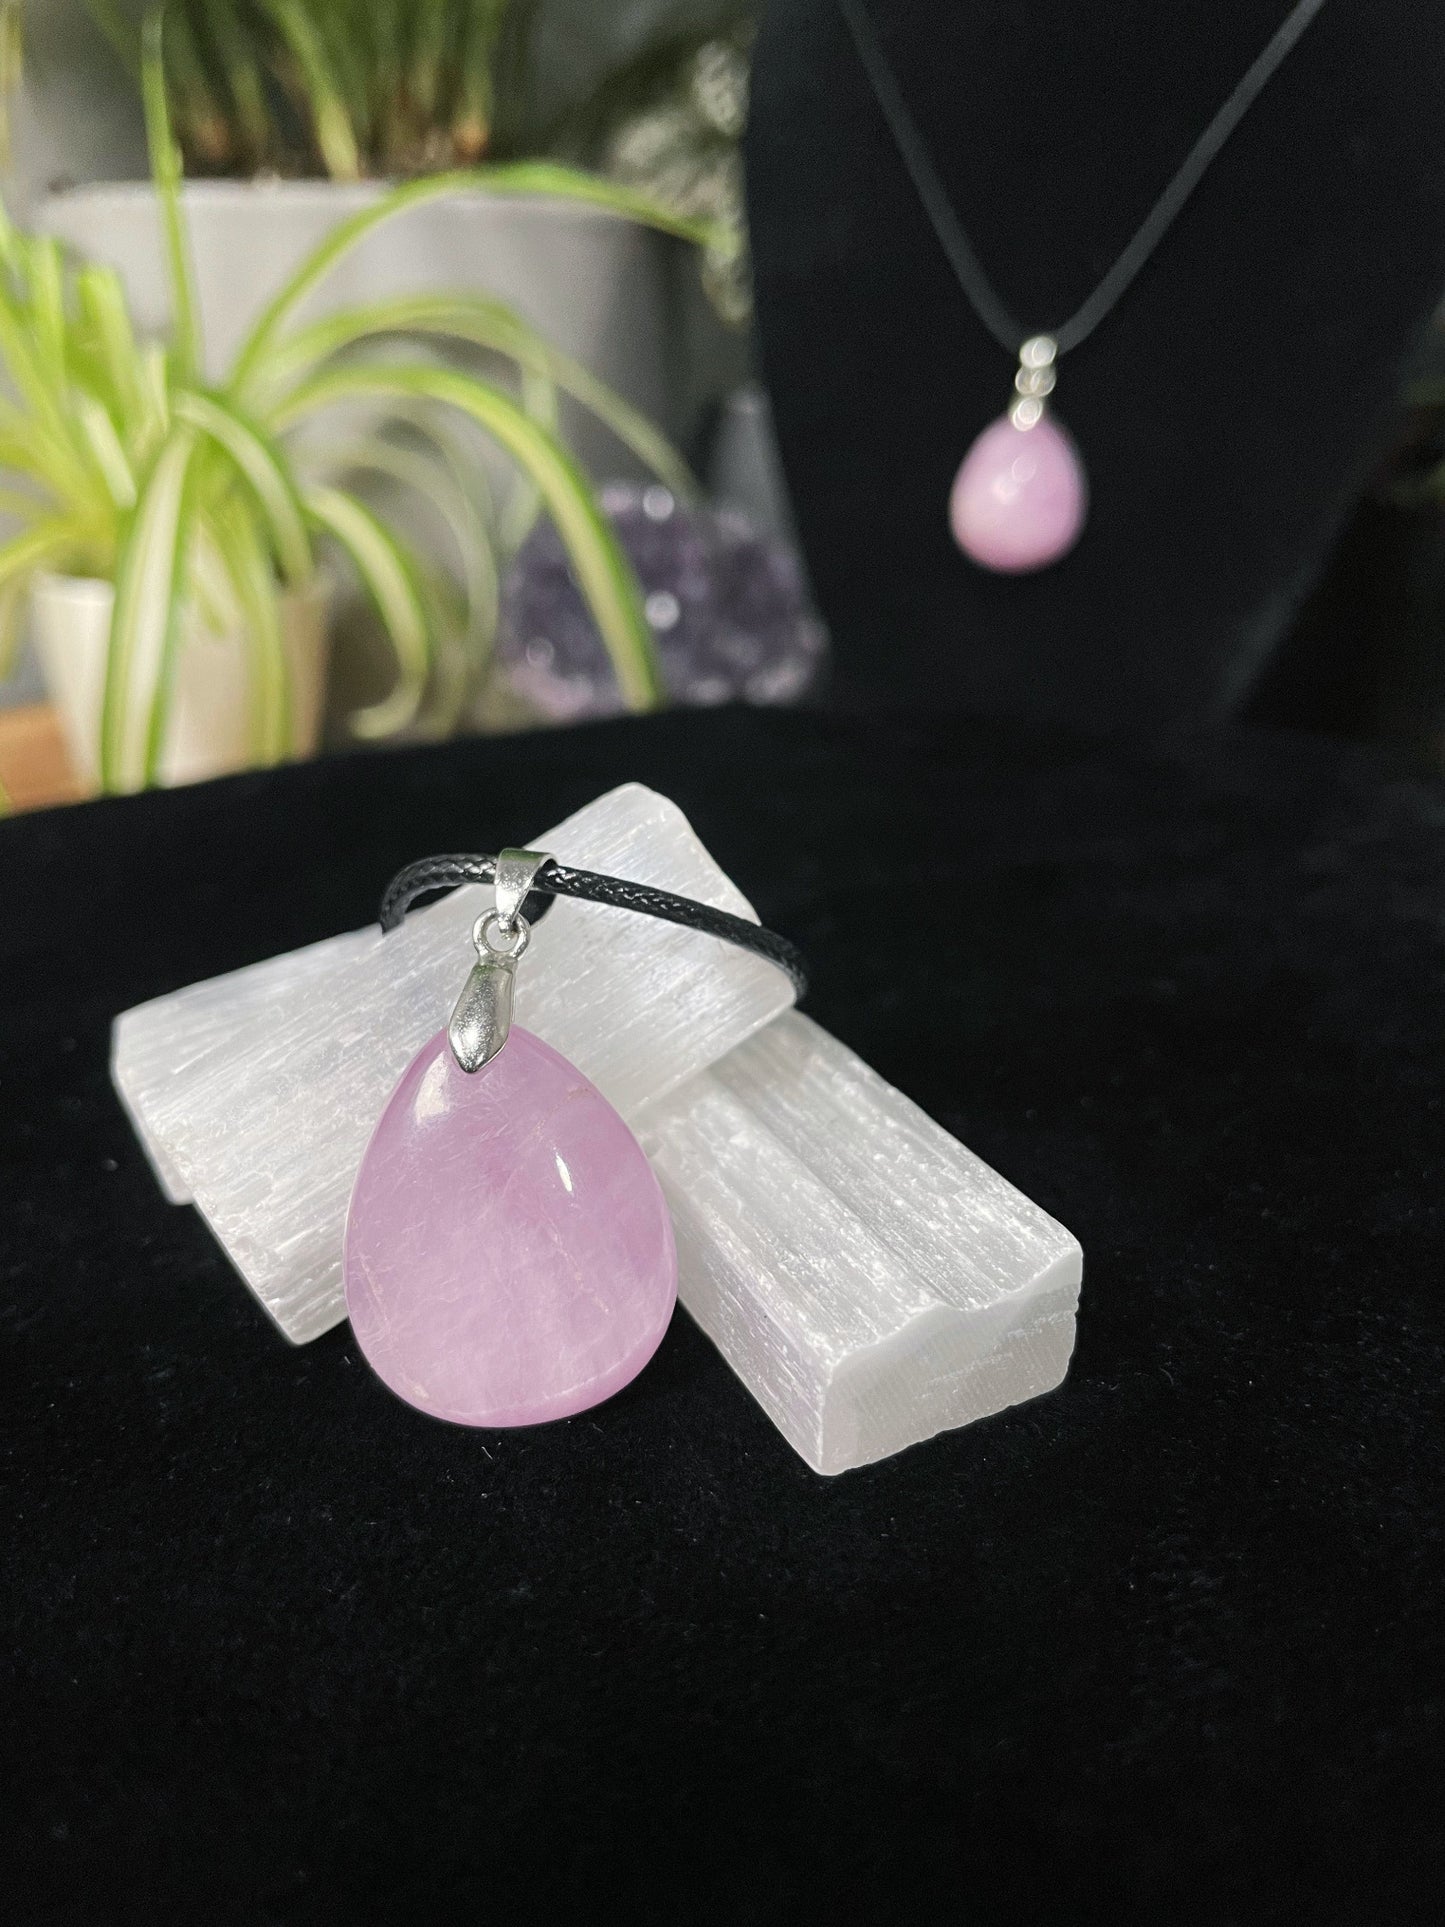 An image of a high-quality kunzite teardrop shaped pendant on a necklace. It sits atop some selenite chunks and a black velvet surface.